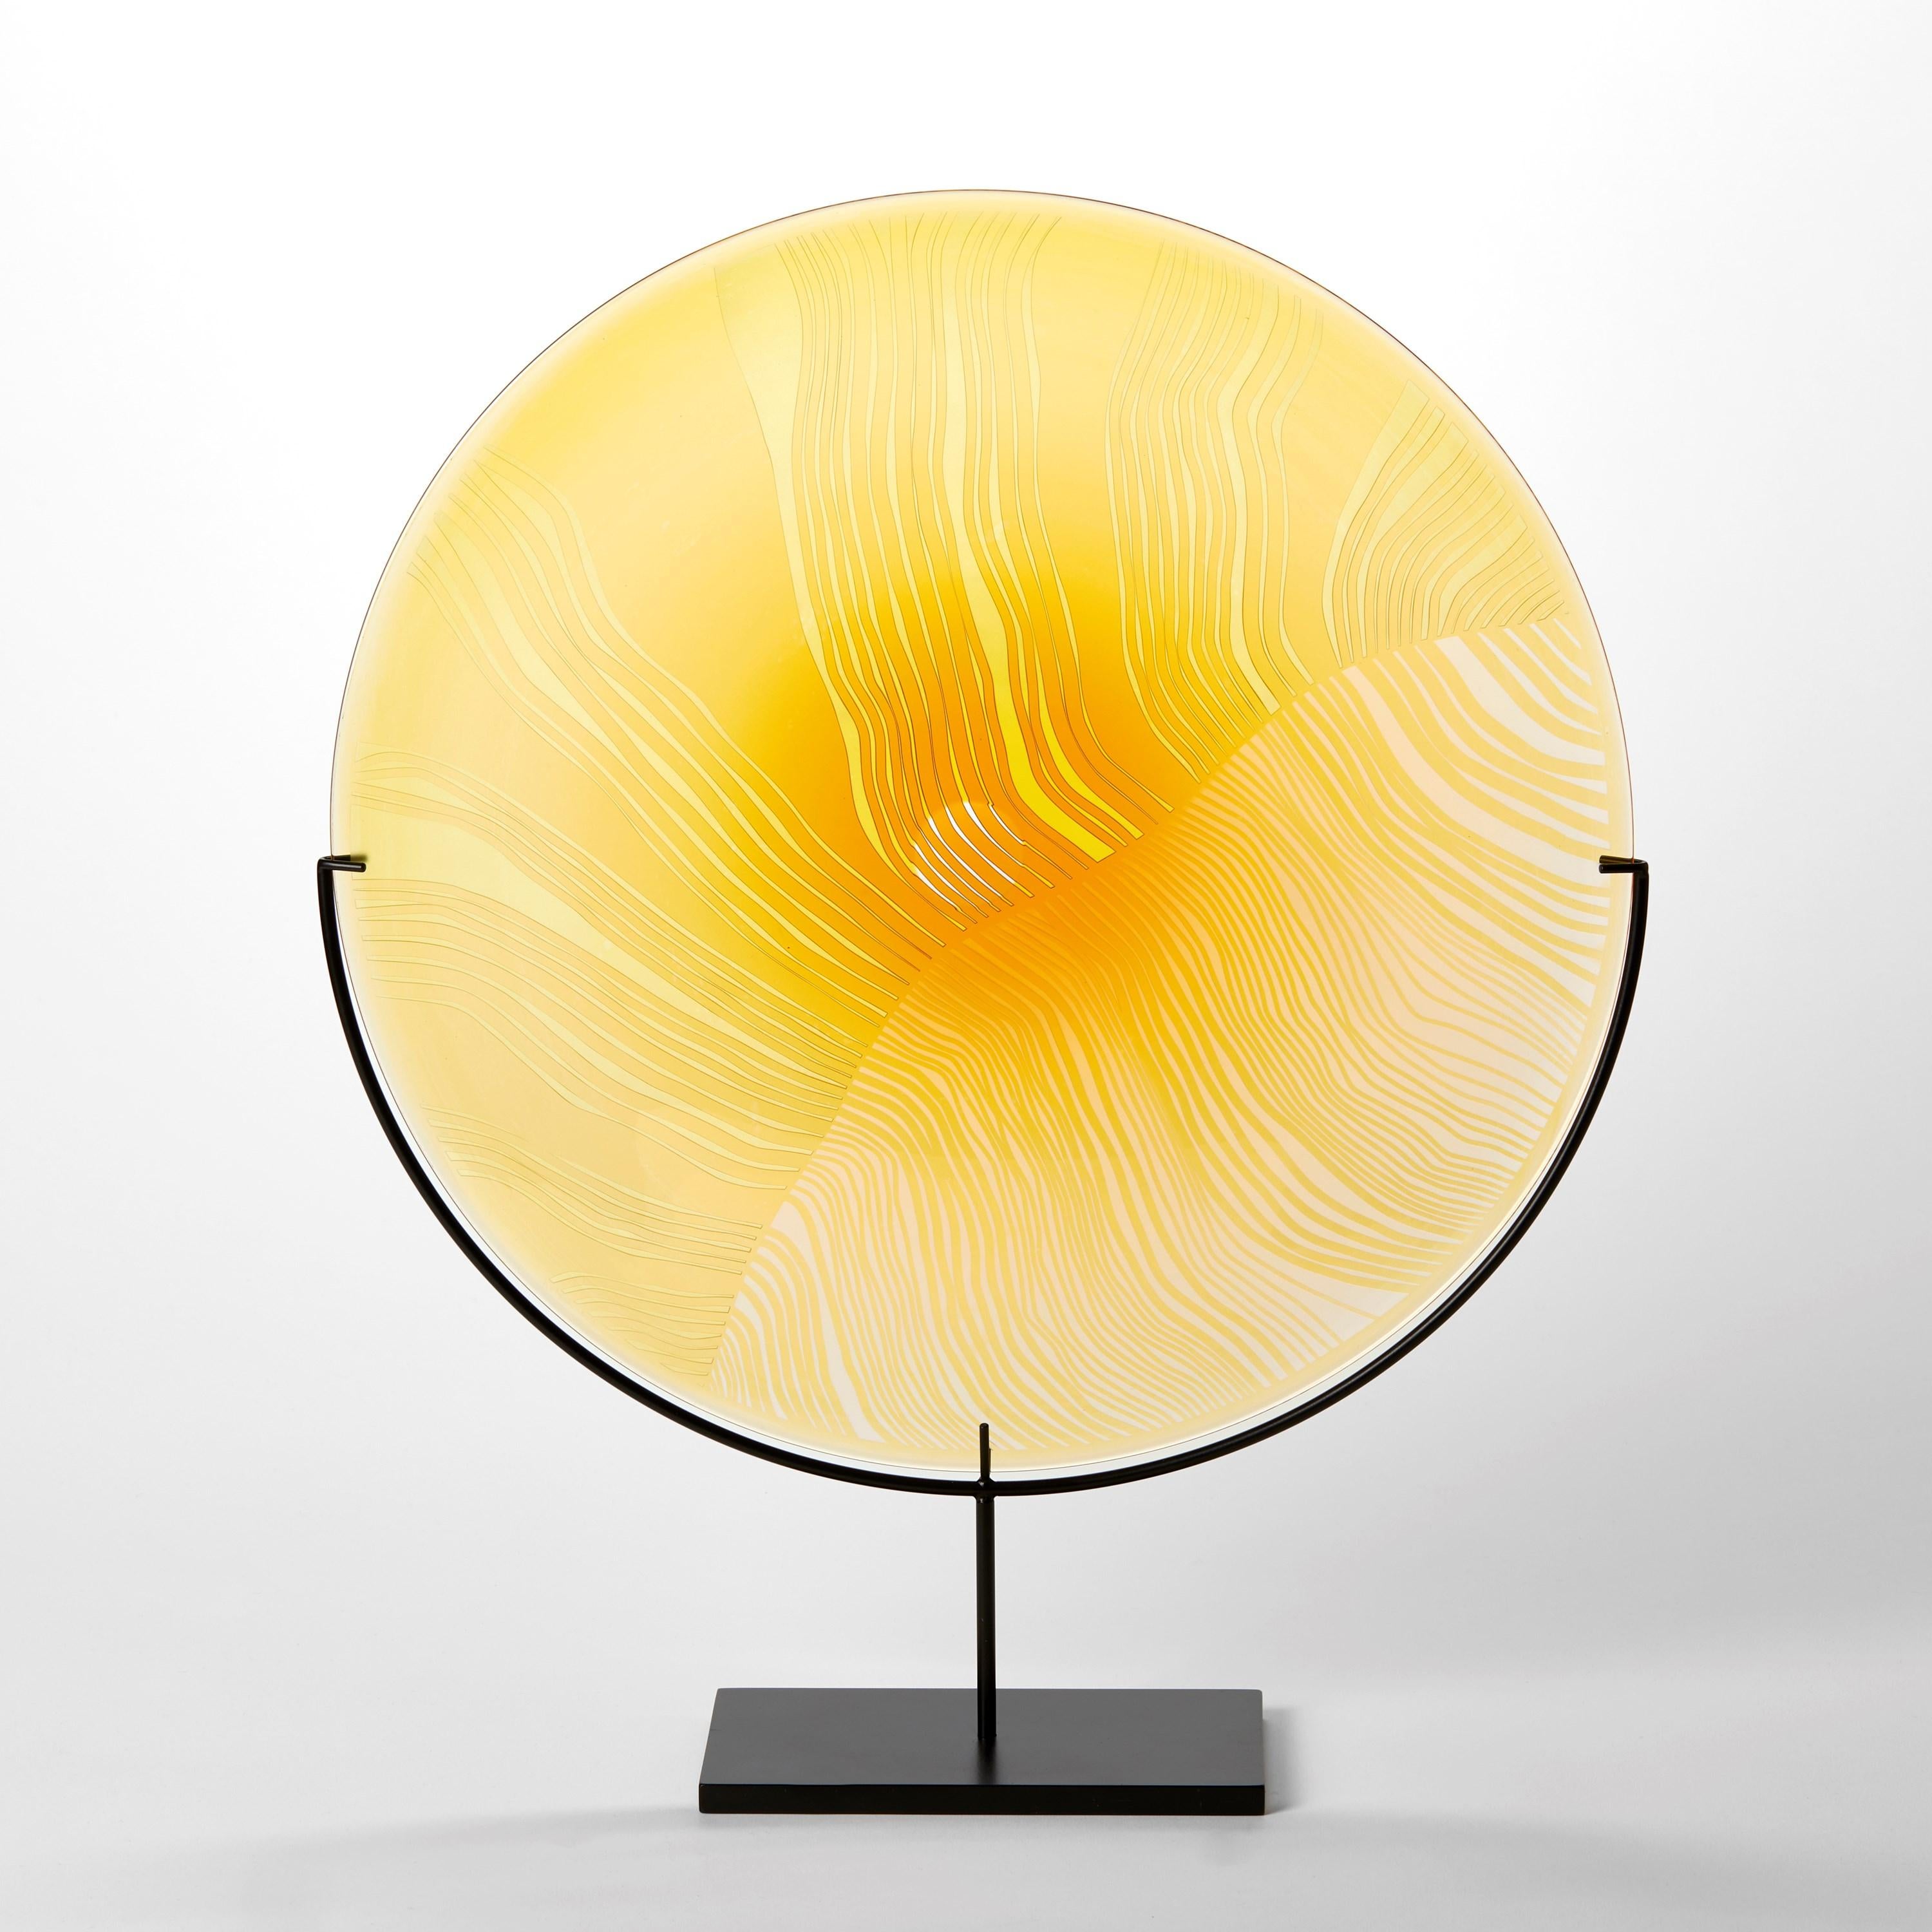 British Solar Storm Gold over Gold, a mounted cut glass rondel artwork by Kate Jones For Sale